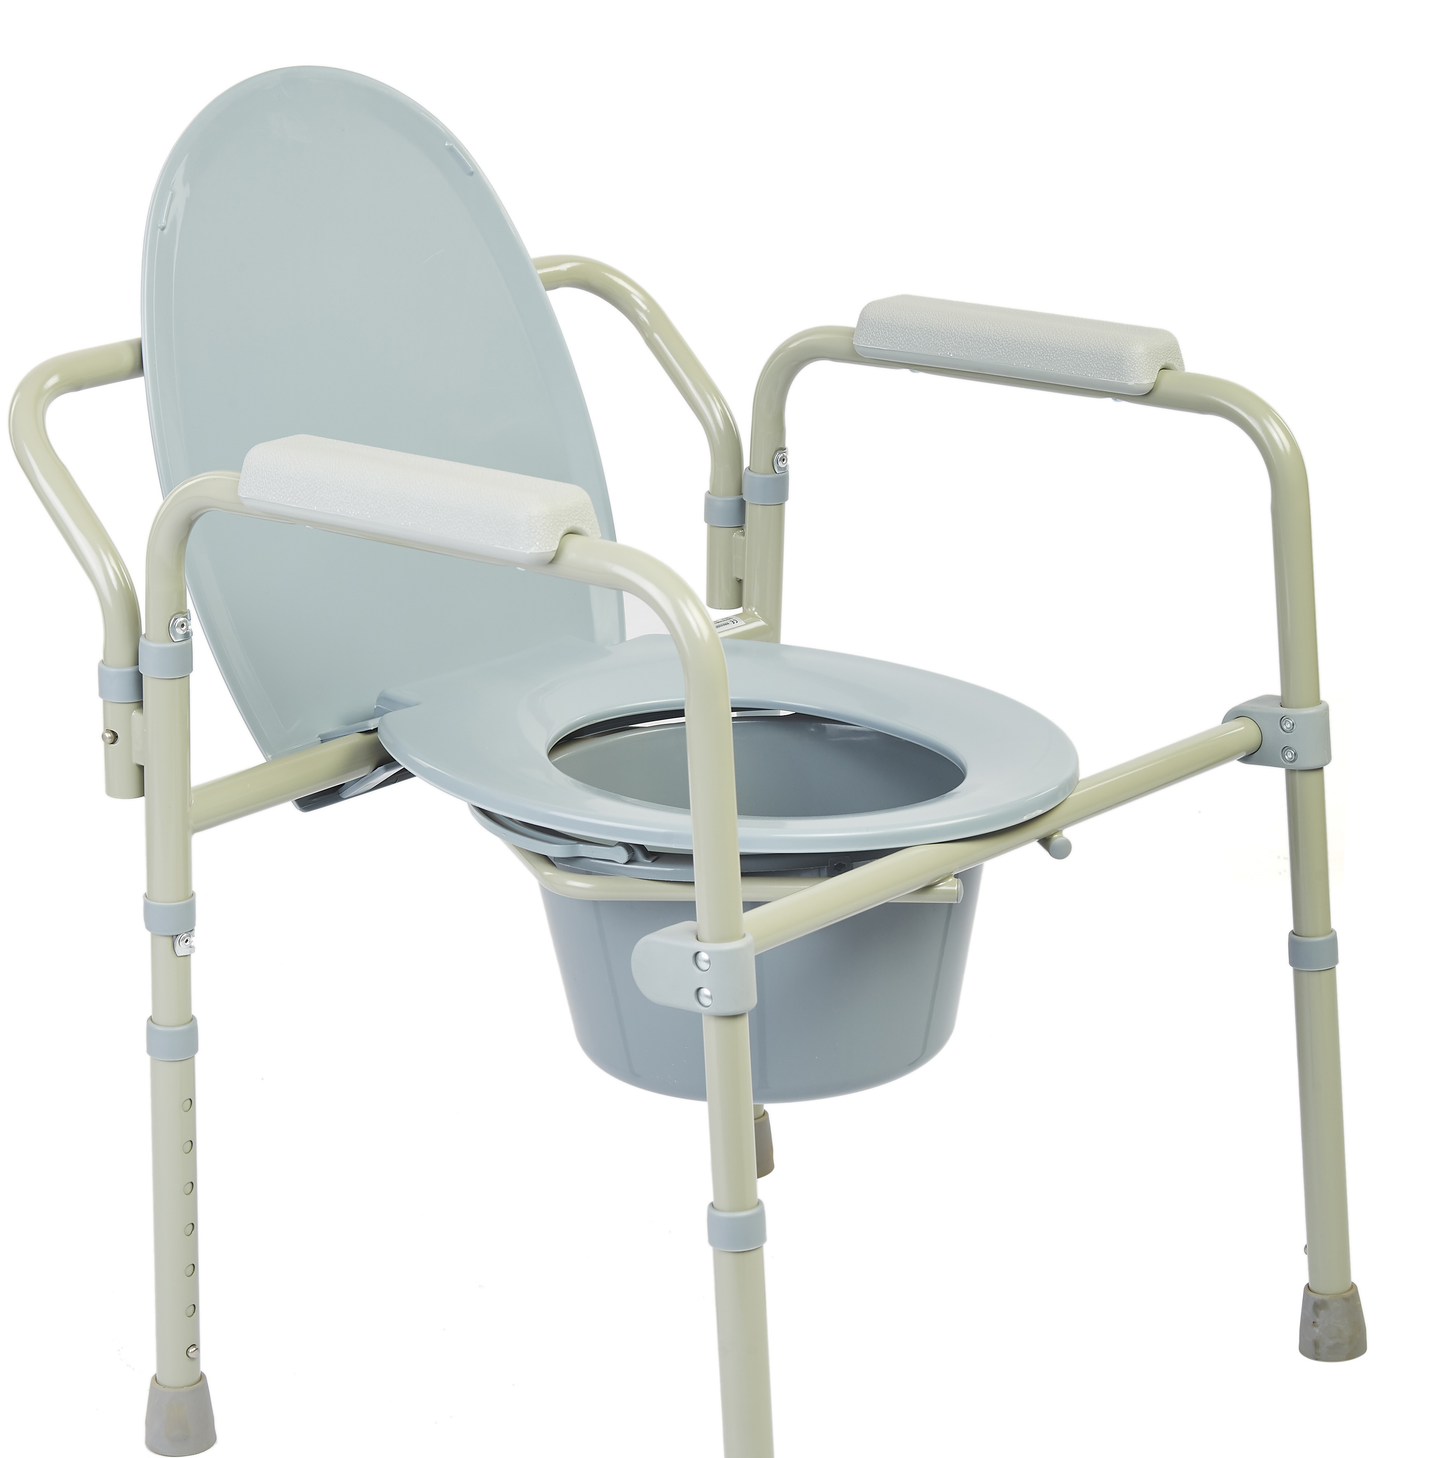 M300 - Bedside Commode Foldable